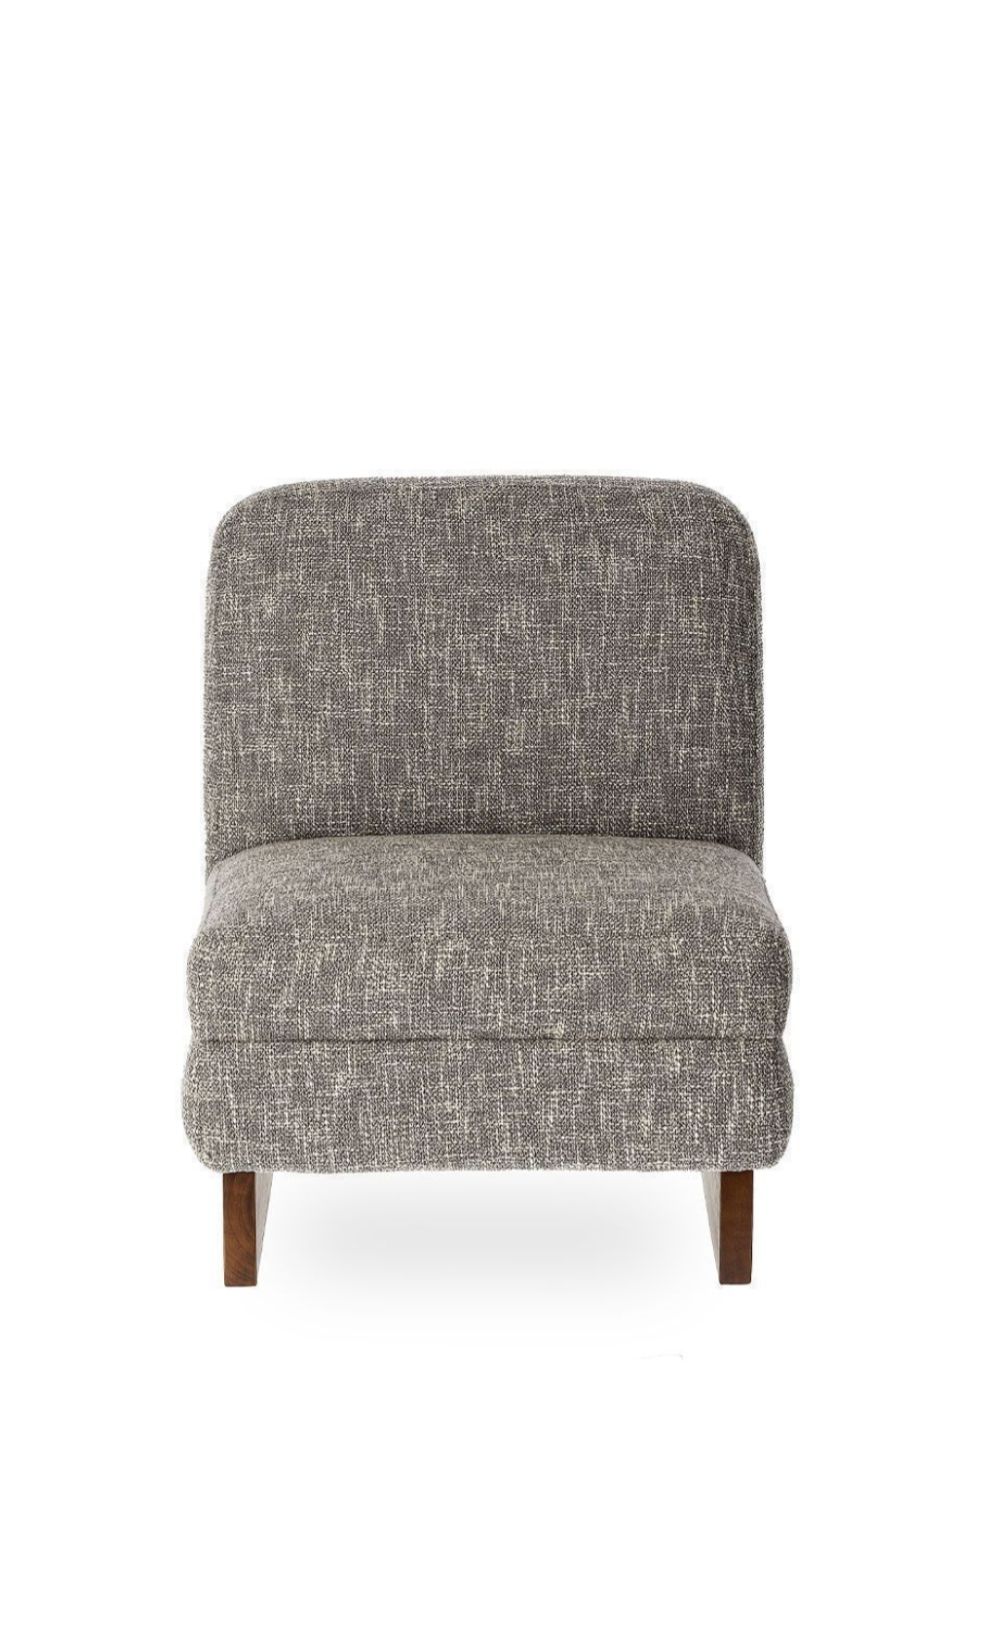 trinity-fauteuil-gris-chiné-seventies